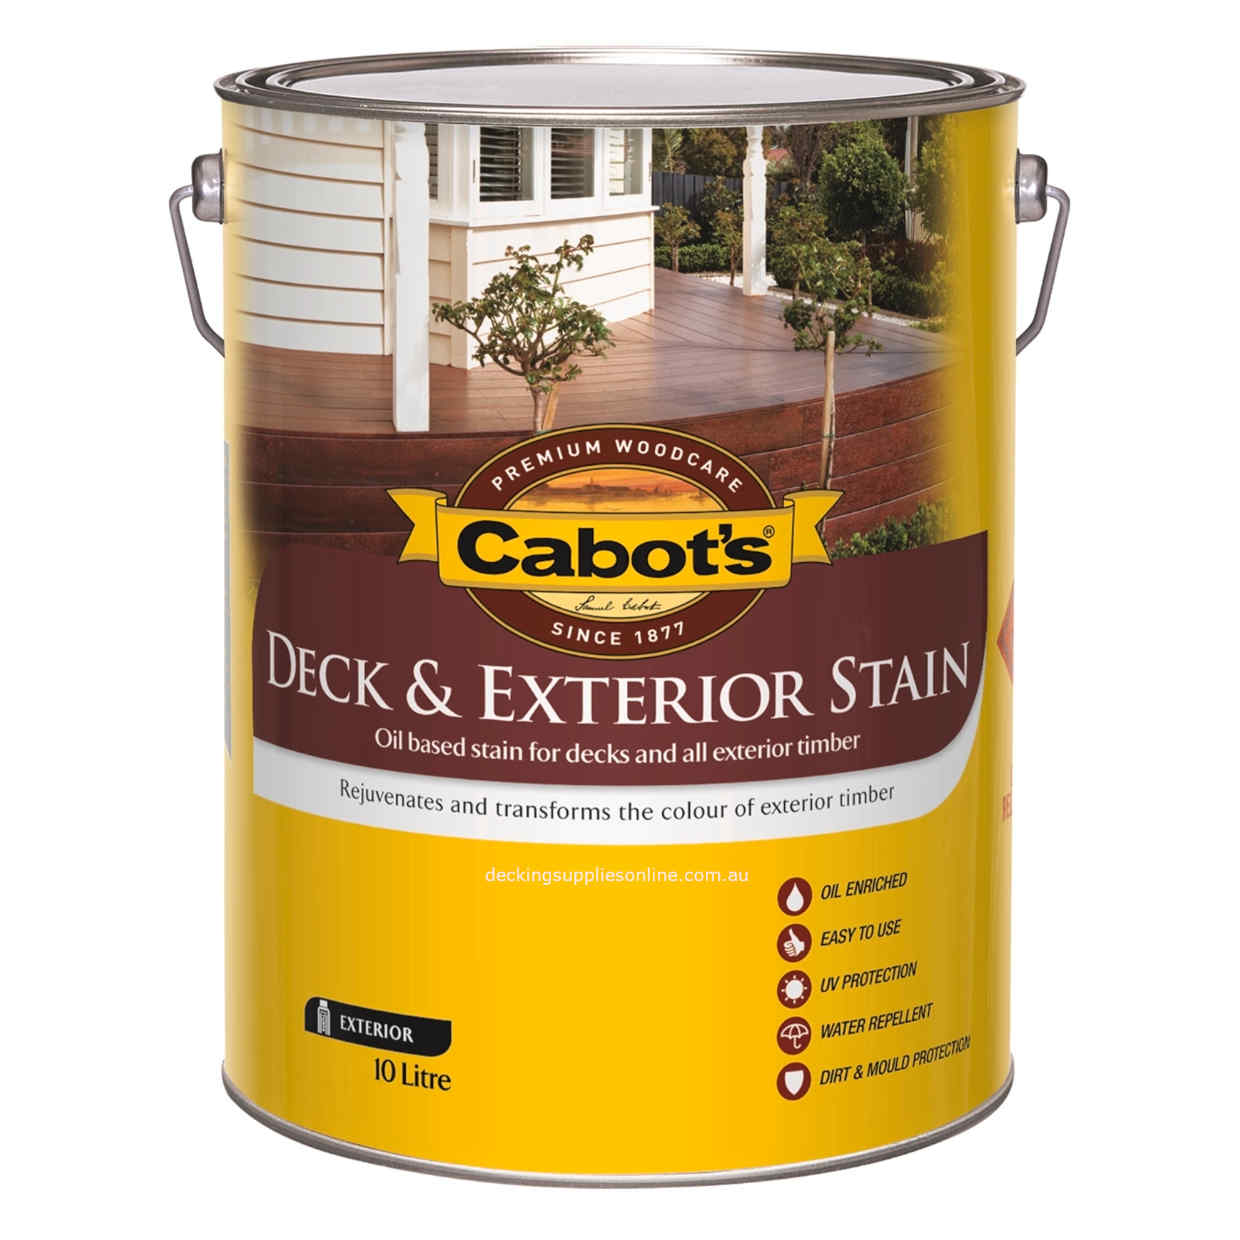 Cabots_Deck___Exterior_Stain_Oil_Based_10_Litre_Decking_Supplies_Online